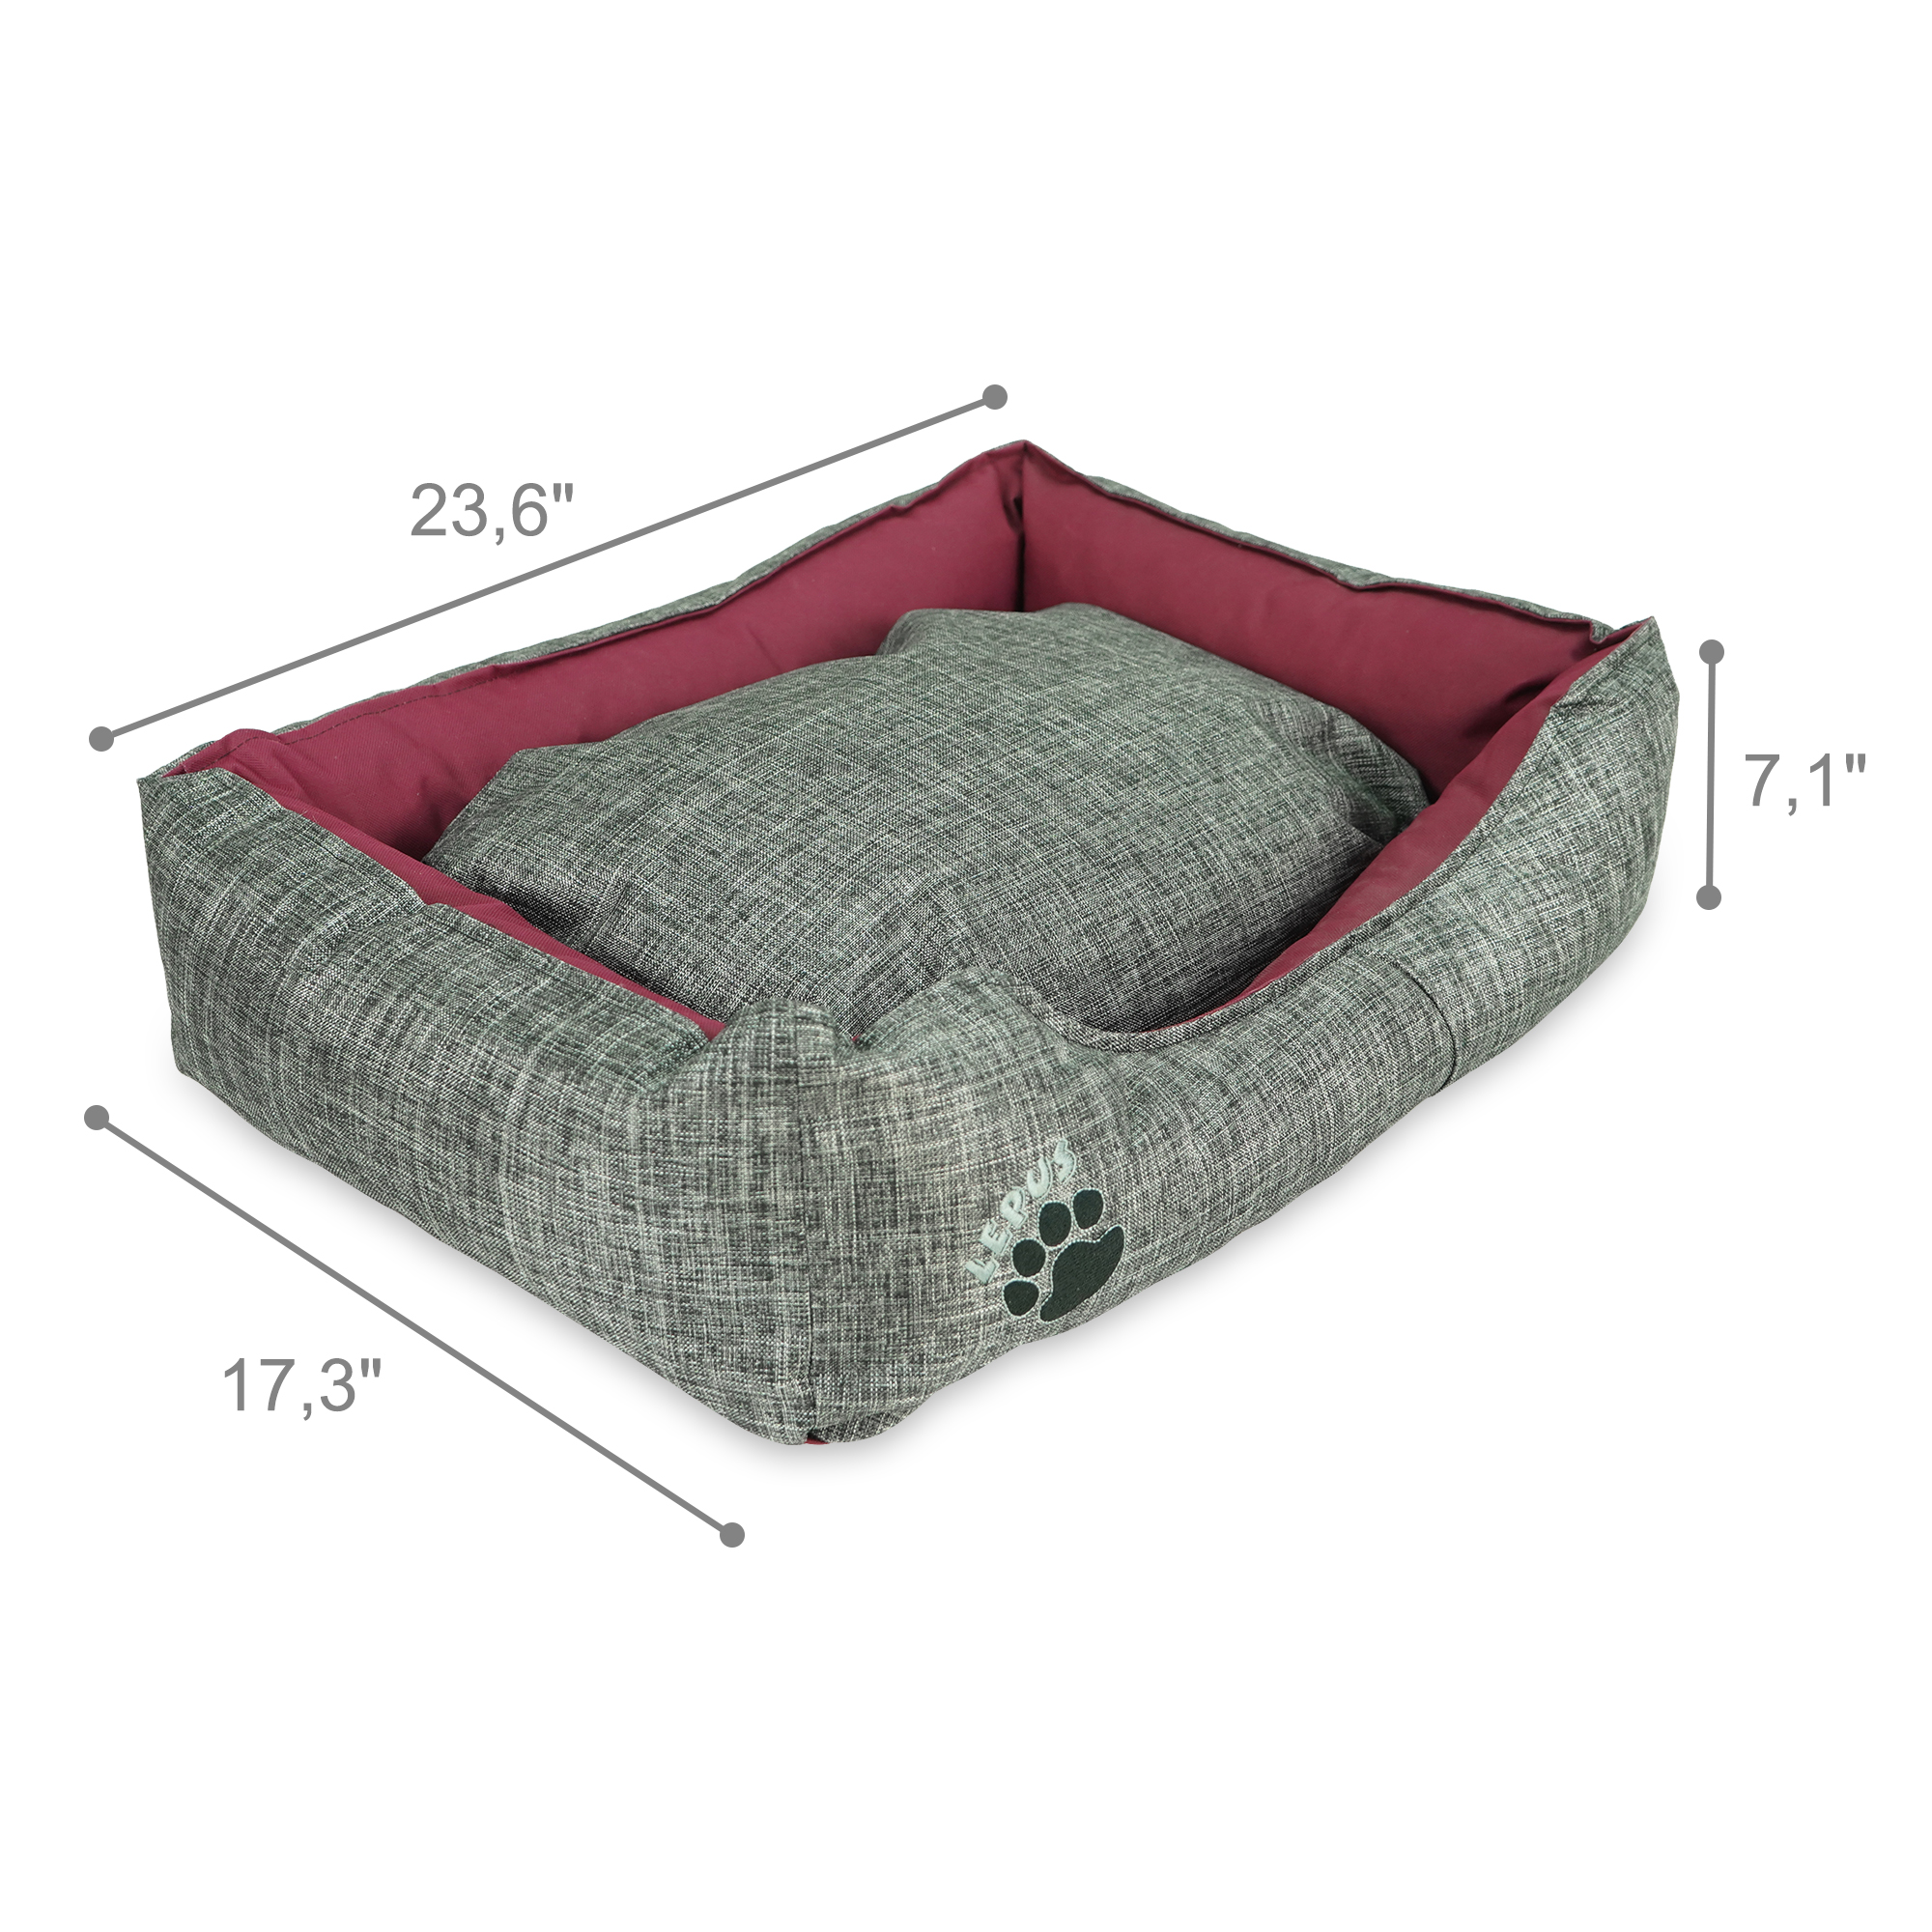 SUSSEXHOME Pets 23.5 x 17.3 x 7 Inches Outdoor Dog Bed for Medium Dogs - Durable Waterproof Sofa Dog Bed with Sides - (GRAY) - image 3 of 6